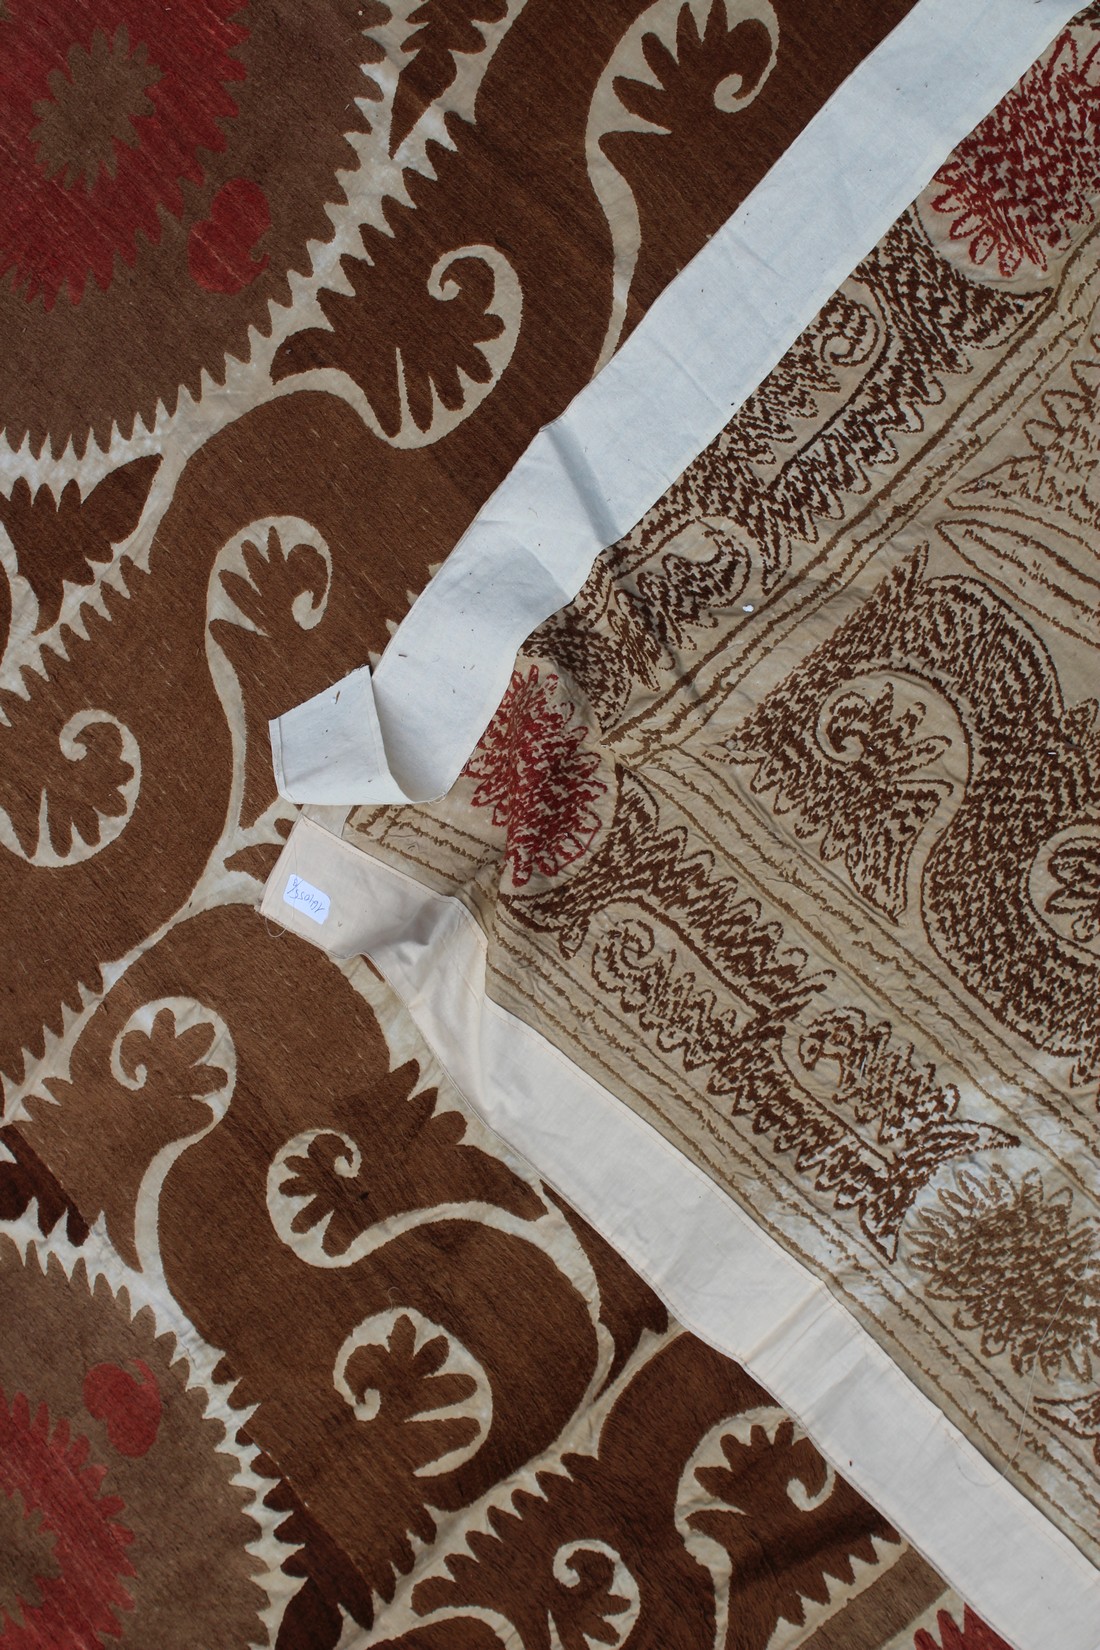 A VERY LARGE 20TH CENTURY SAMARKAND UZBEKISTAN WEDDING SUZANI TEXTILE, in light browns and reds on - Image 8 of 8